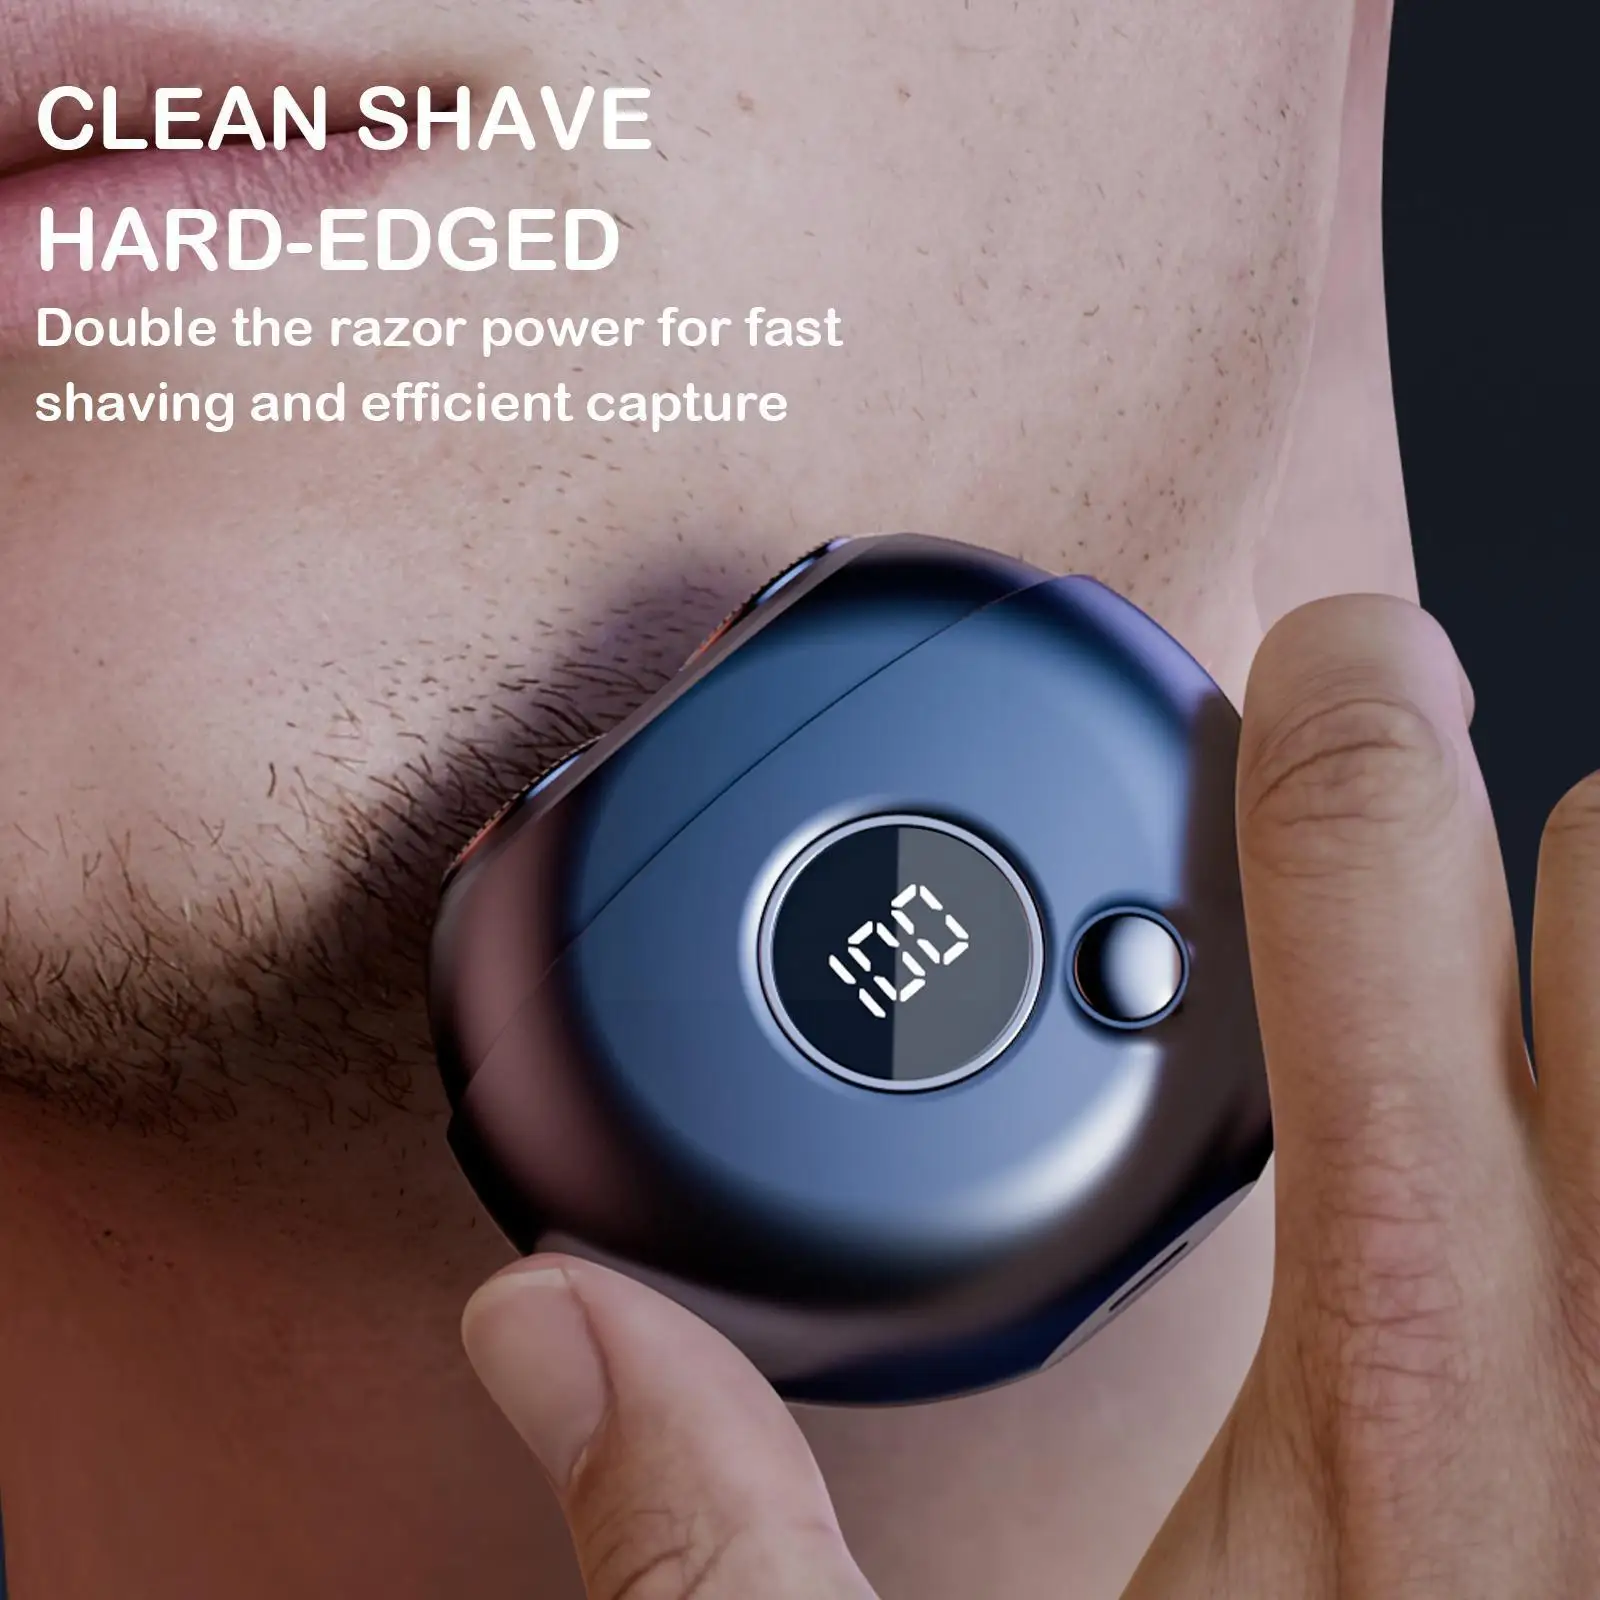 

Mini Razor Portable Rechargeable Electric Fly Saucer Razor Waterproof Barber Rotary Shaver Beard Shavers For Men Trimmer J7S0